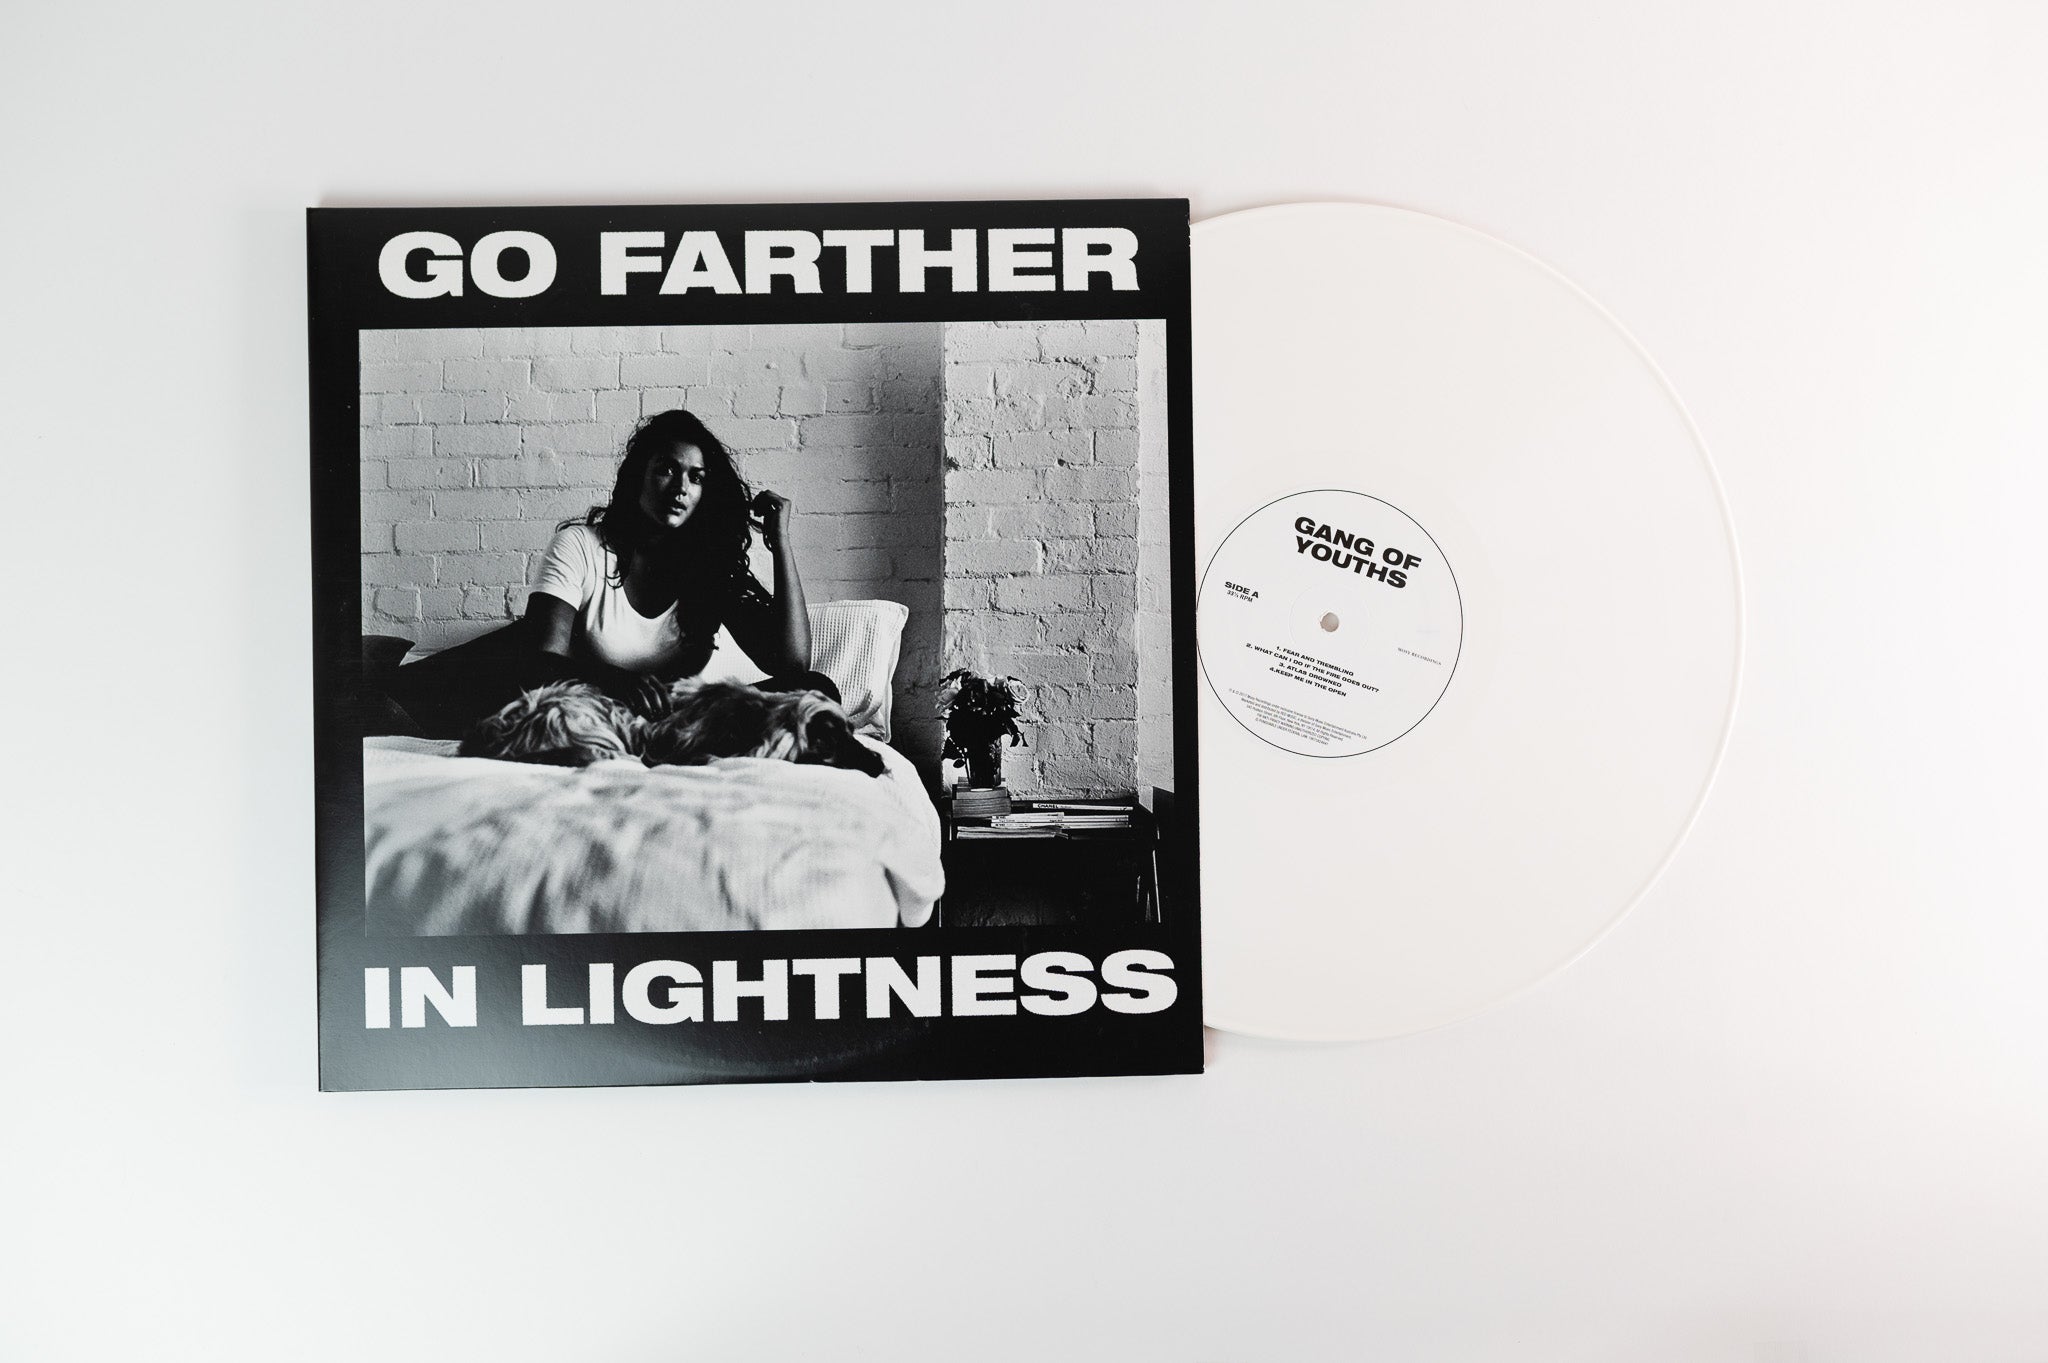 Gang of Youths - Go Farther In Lightness on Mosy Recordings - White Vinyl